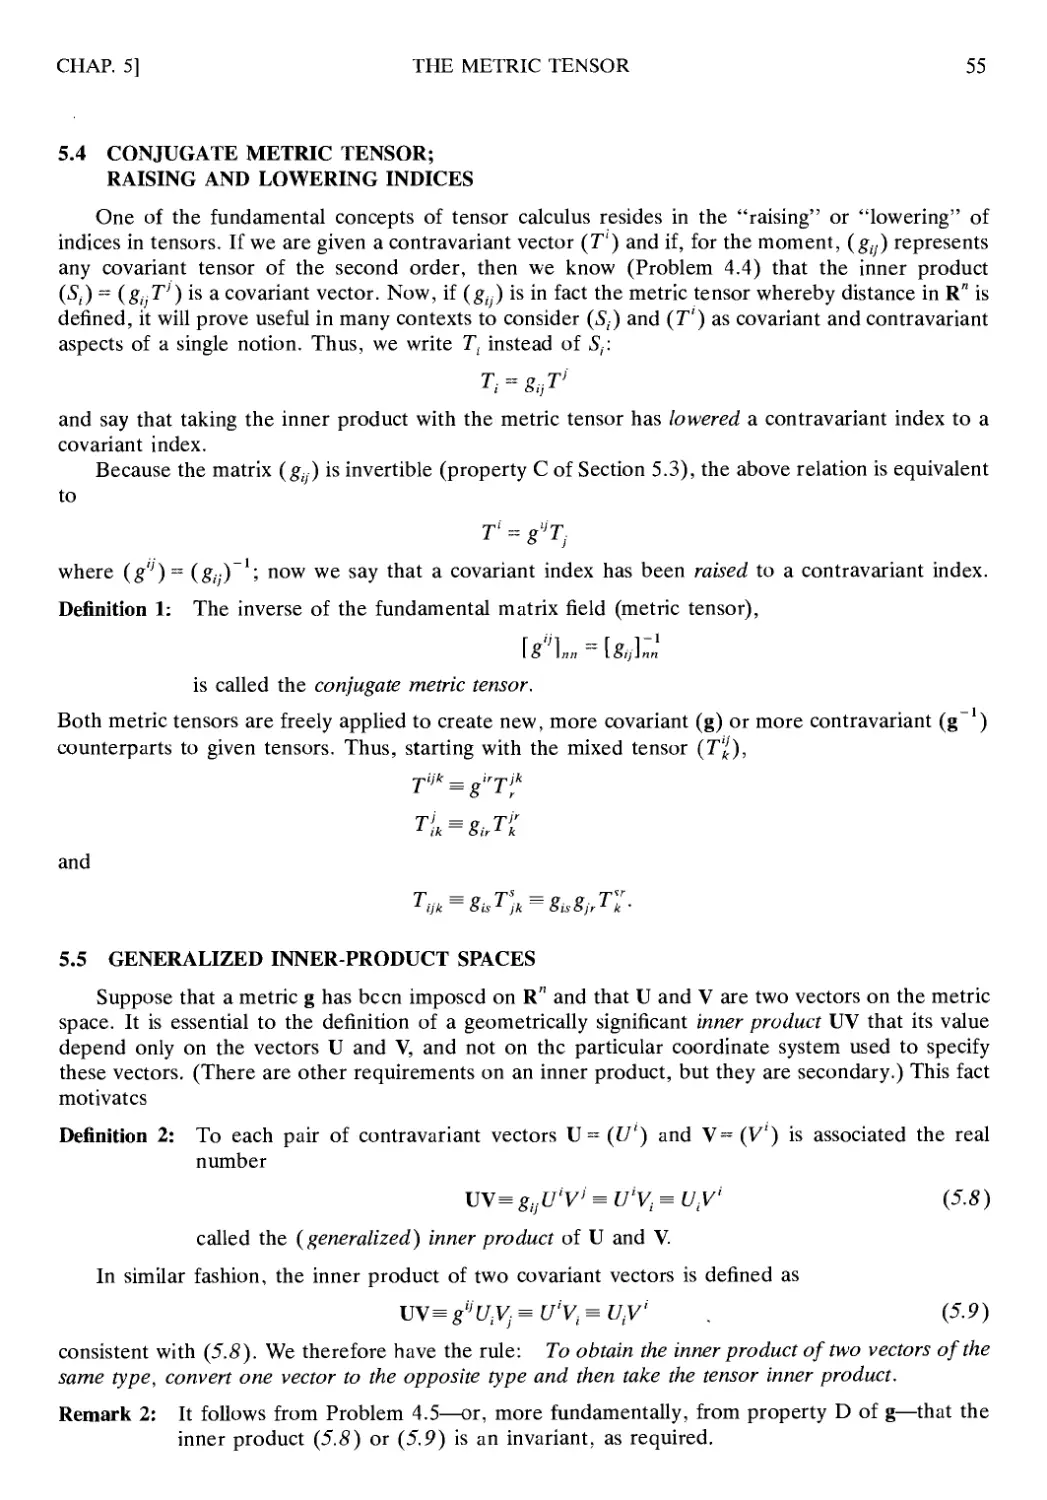 5.4 Conjugate Metric Tensor; Raising and Lowering Indices
5.5 Generalized Inner-Product Spaces